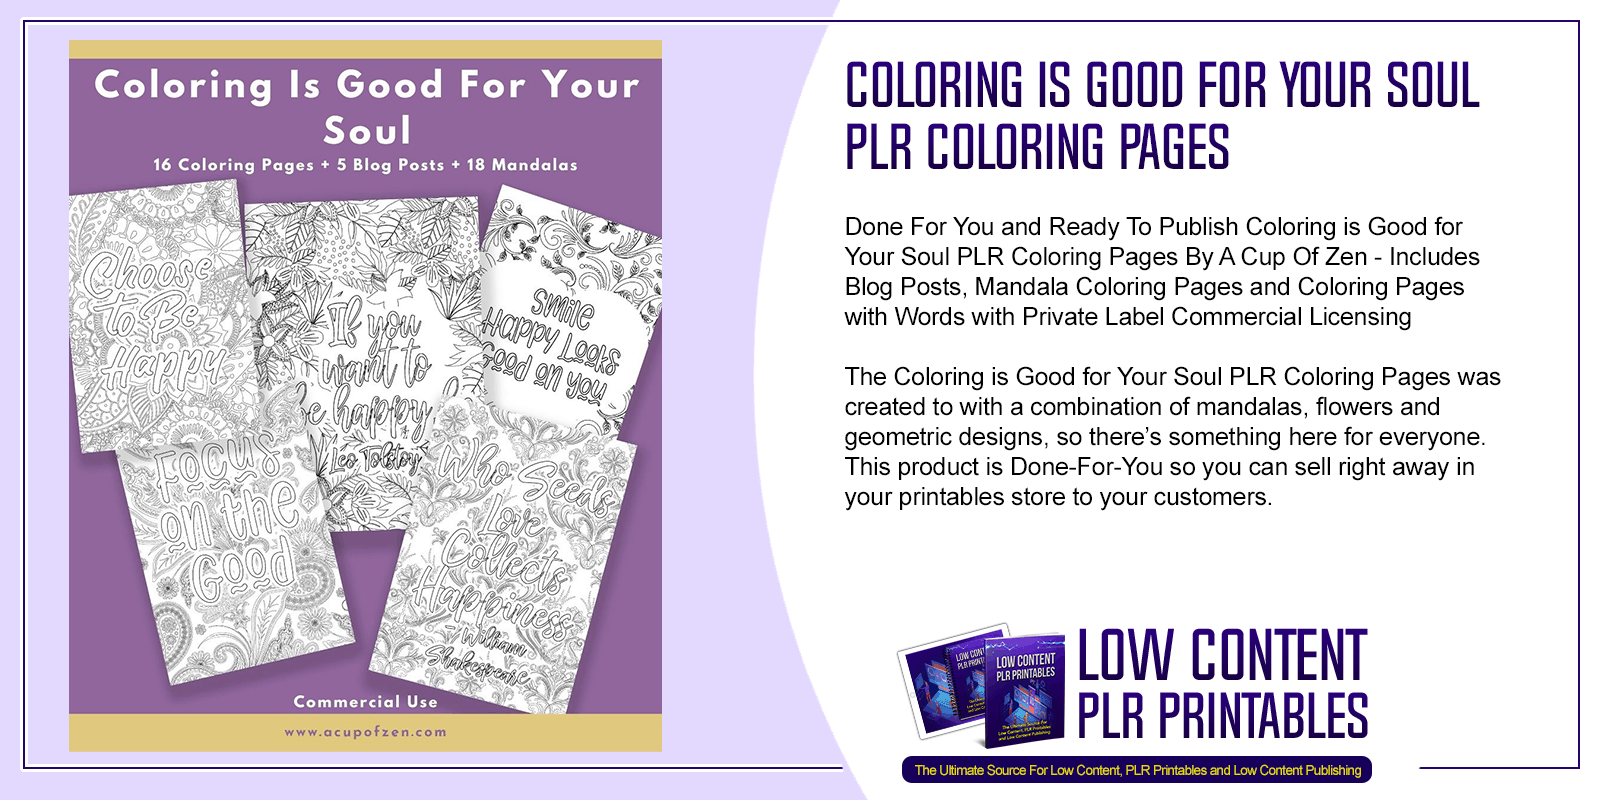 Coloring is Good for Your Soul PLR Coloring Pages